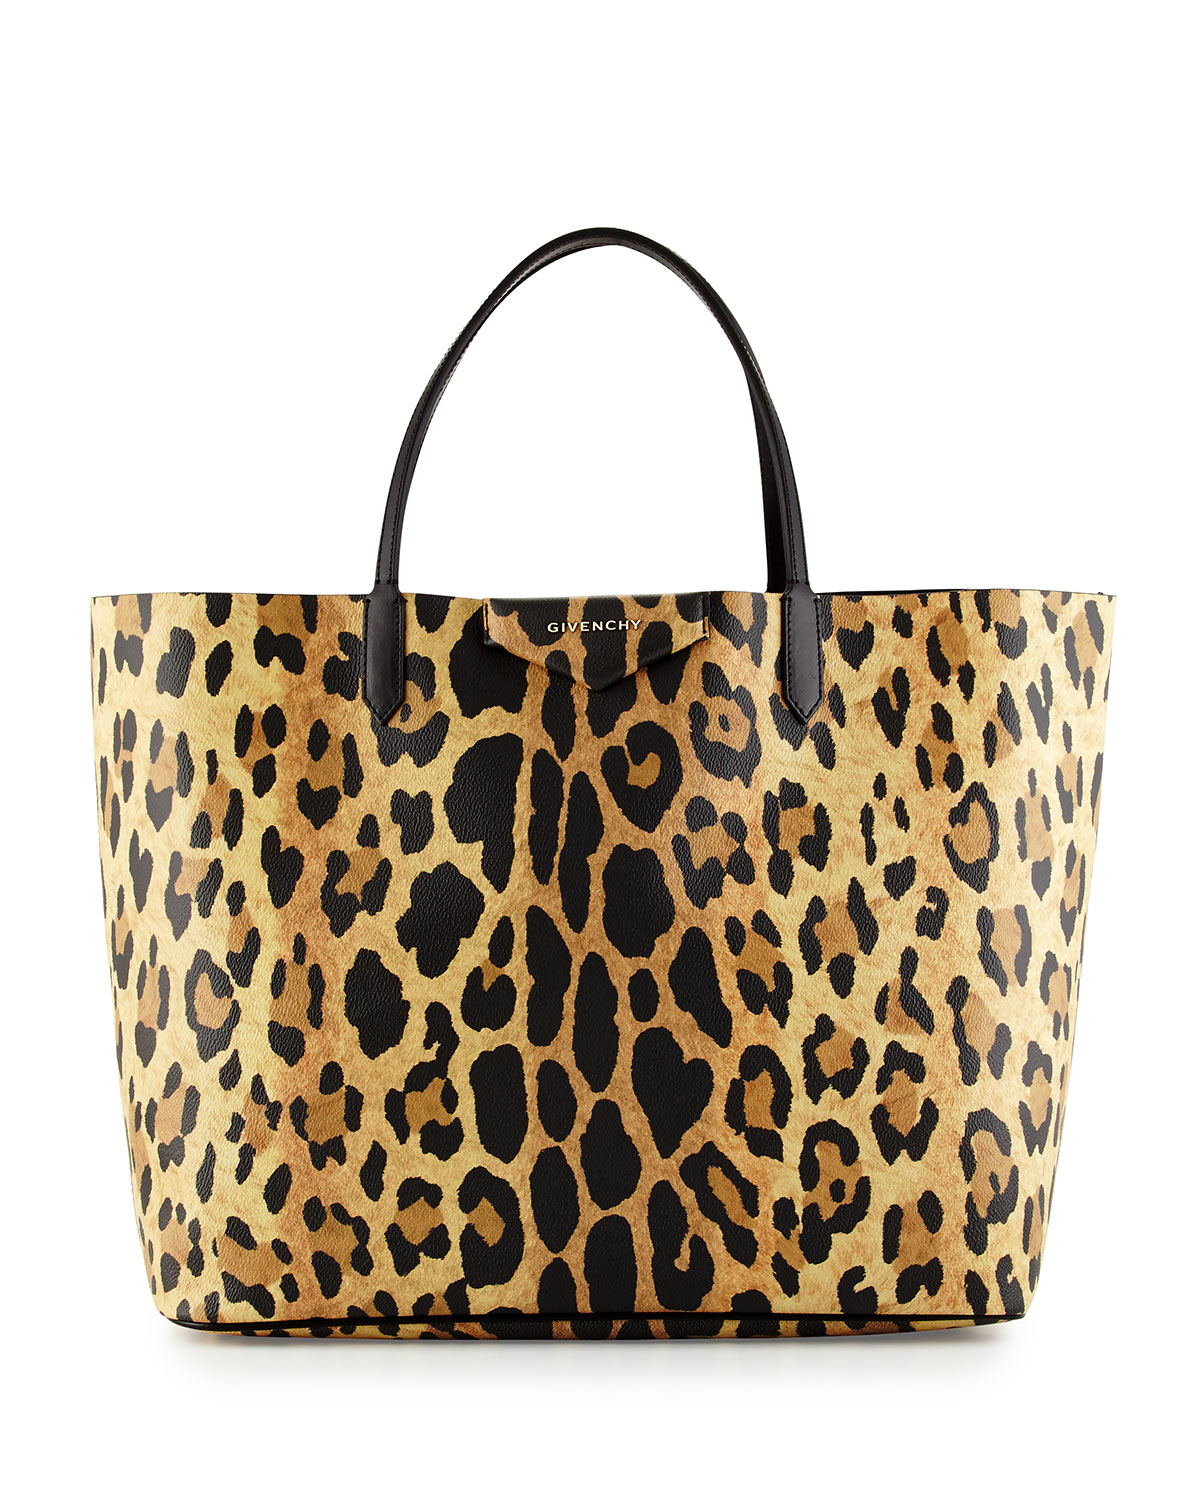 Givenchy Antigona Large Leather Shopping Tote Bag in Animal | Lyst